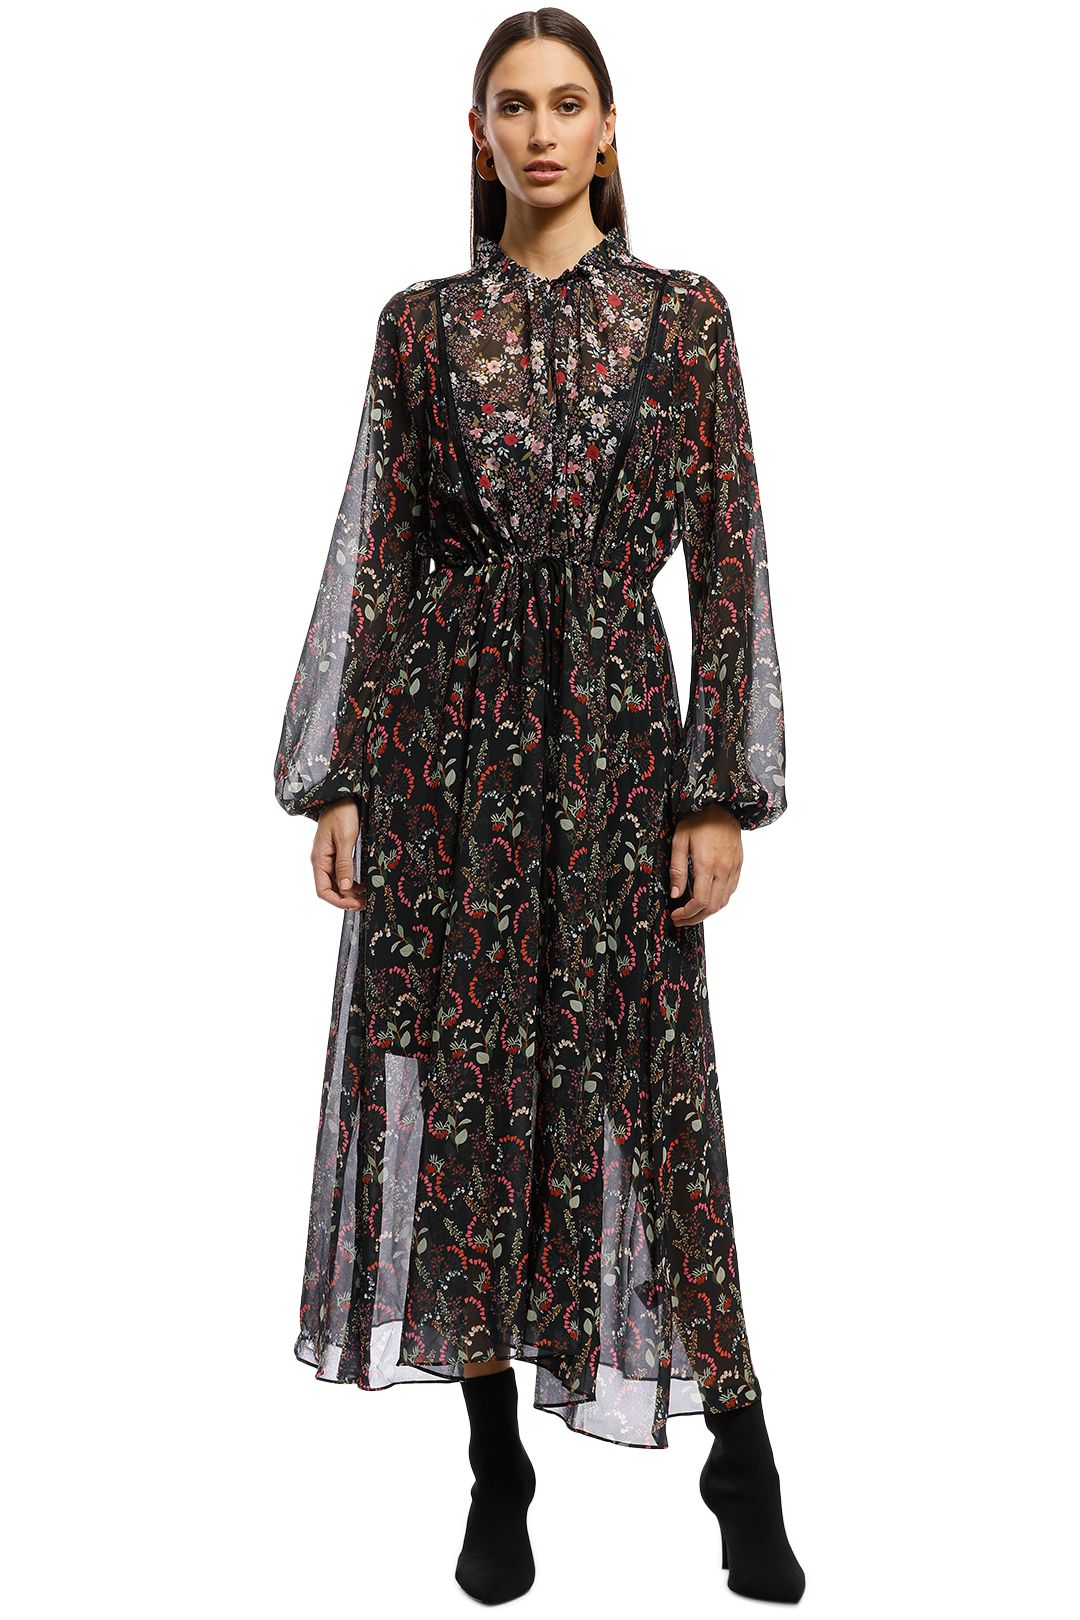 Cooper St - With A Kiss Long Sleeve Midi Dress - Black Floral - Front